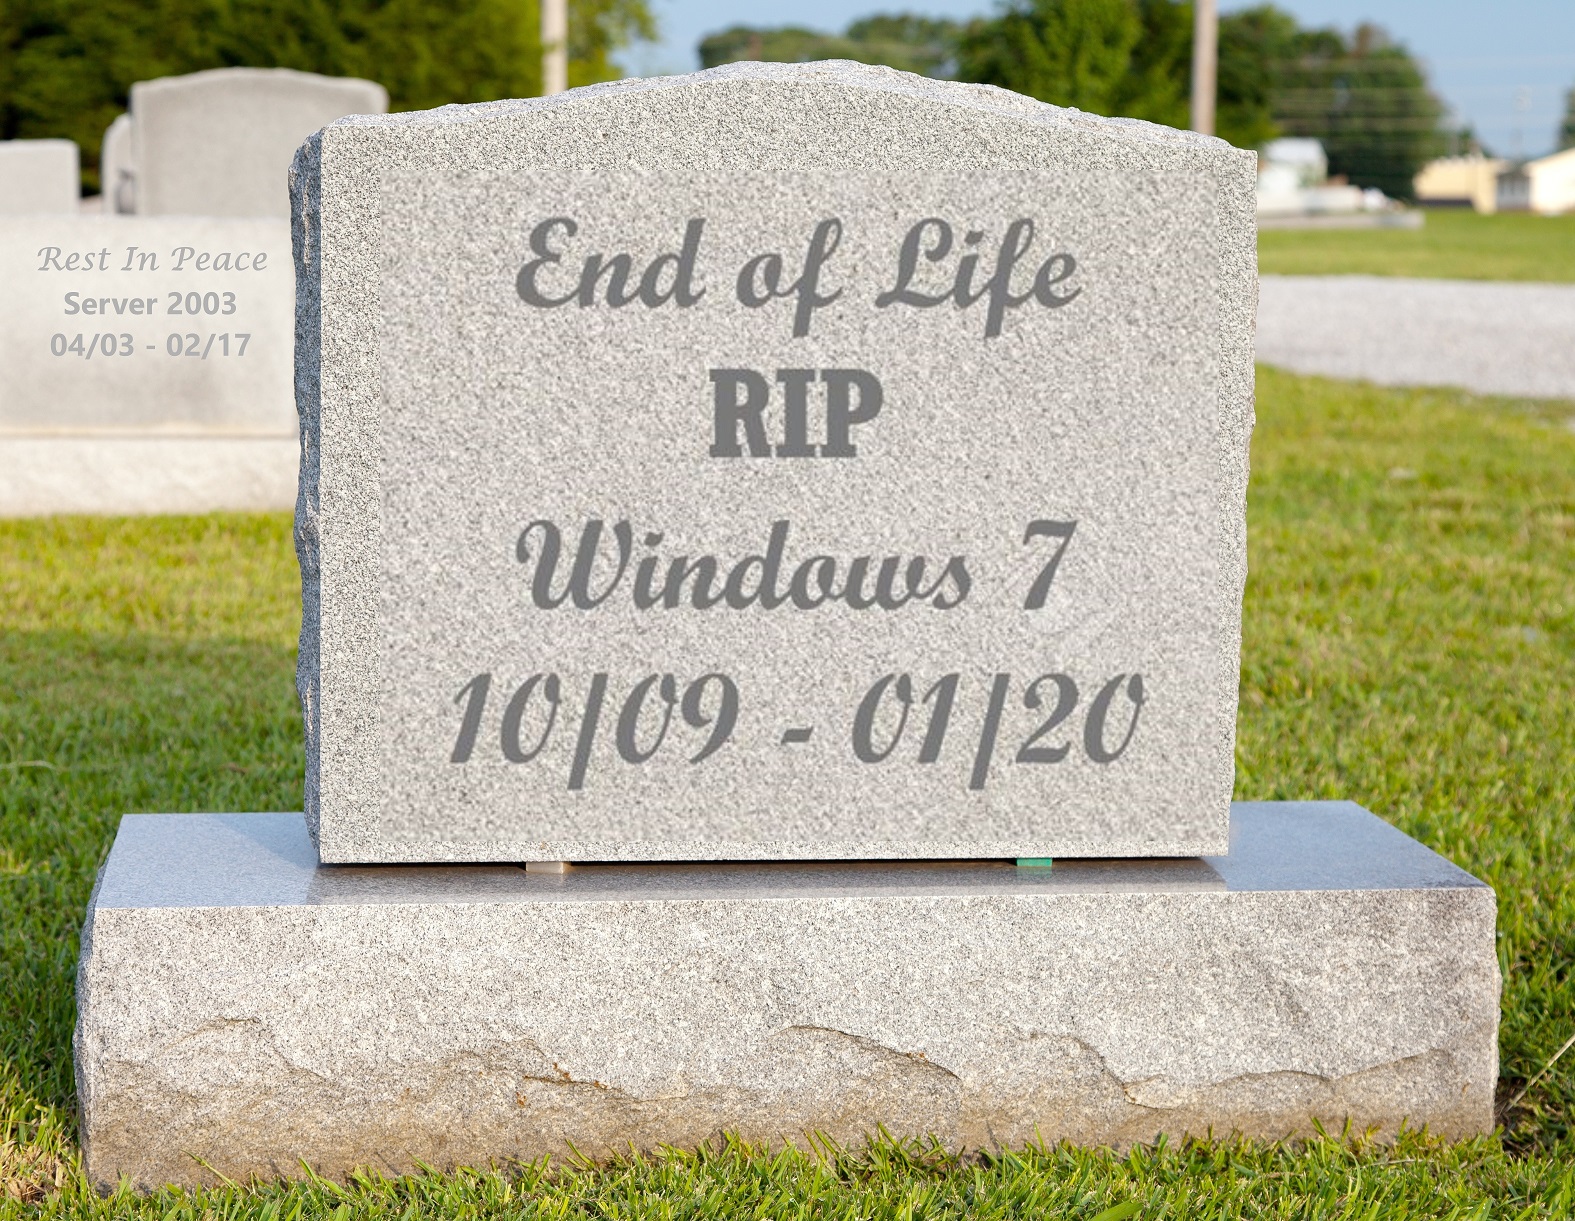 You are currently viewing Windows 7 End of Life is 15 Months Away